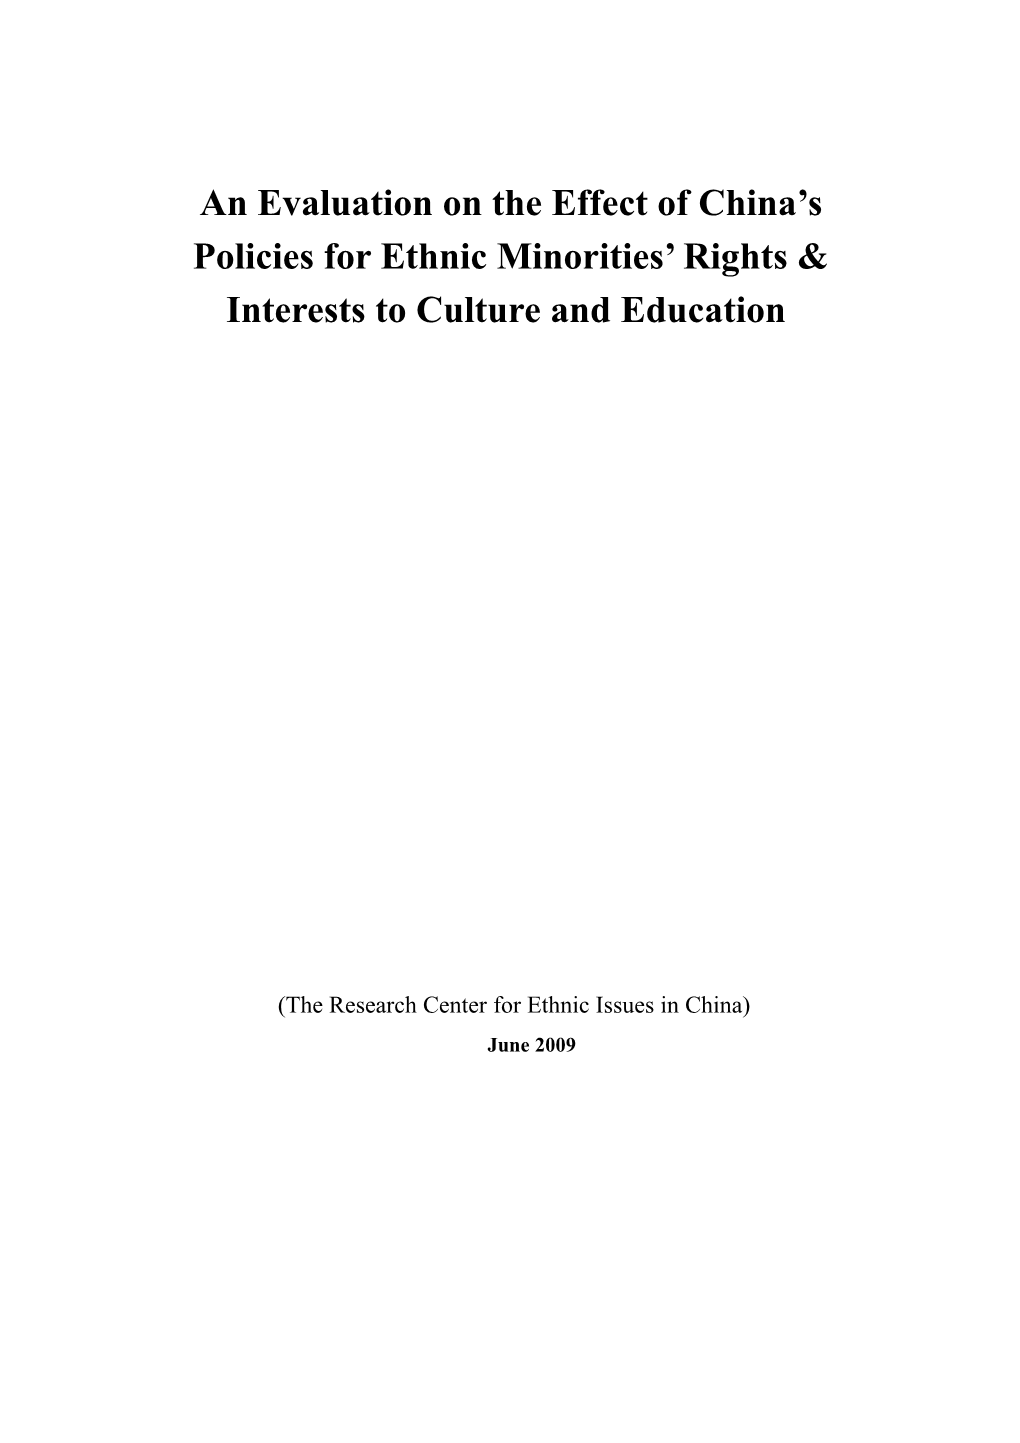 An Evaluation on the Effect of China S Policies for Ethnic Minorities Rights & Interests